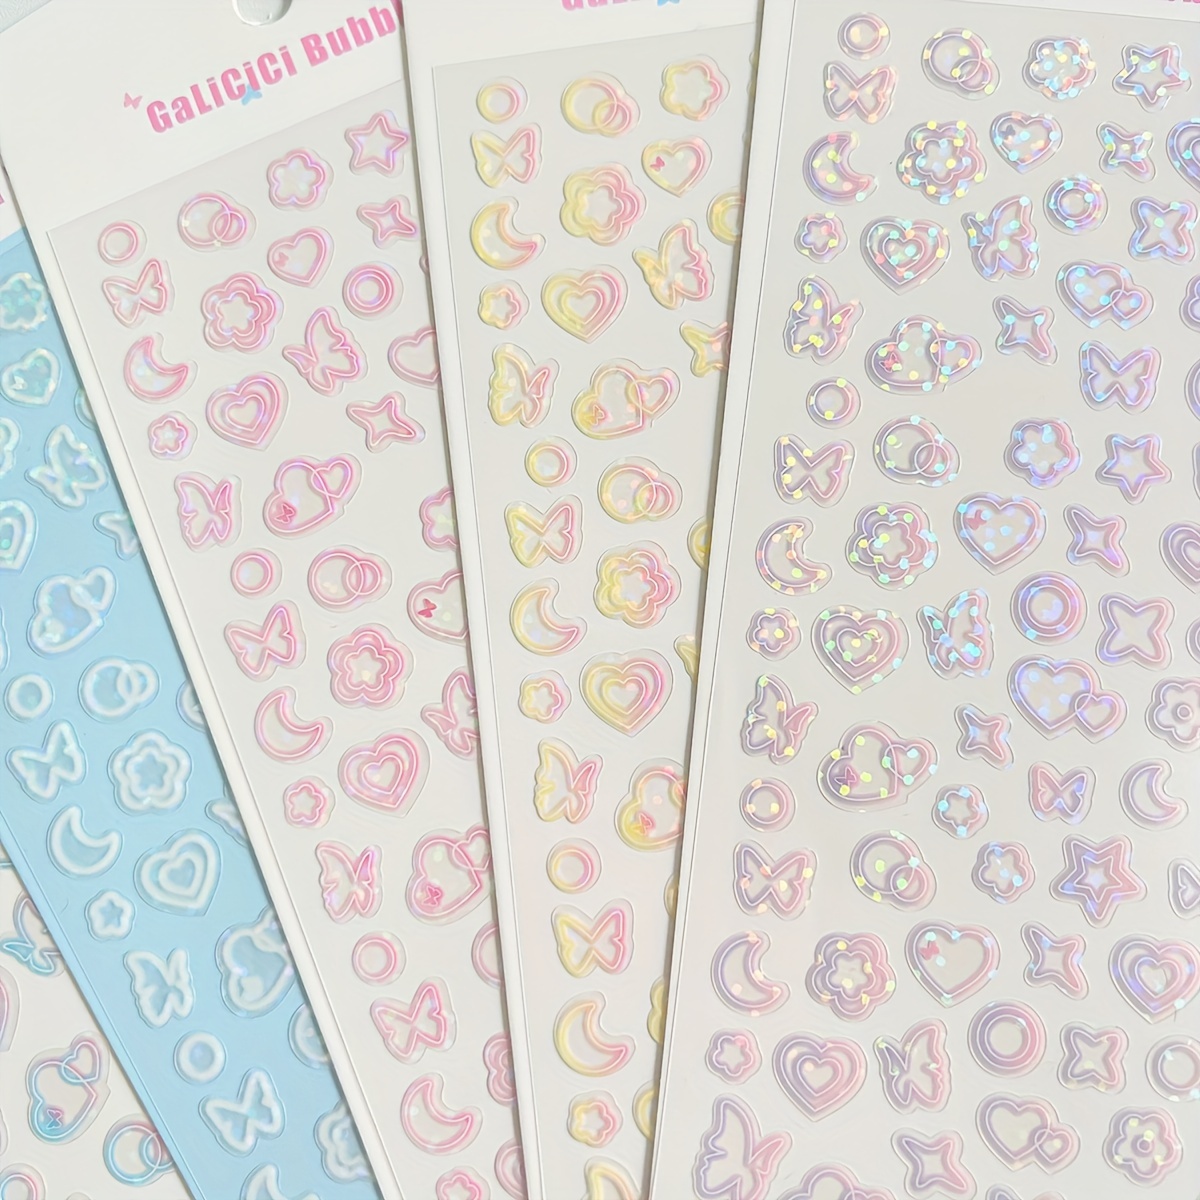  18 Sheets Scrapbook Kpop Stickers Adhesive Decor Shinny Korean  Stickers for Photocards Butterfly Star Moon Waterproof Cute Stickers for  Scrapbooking Planner Diary Decoration (Gold, Silver, Heart) : Arts, Crafts  & Sewing